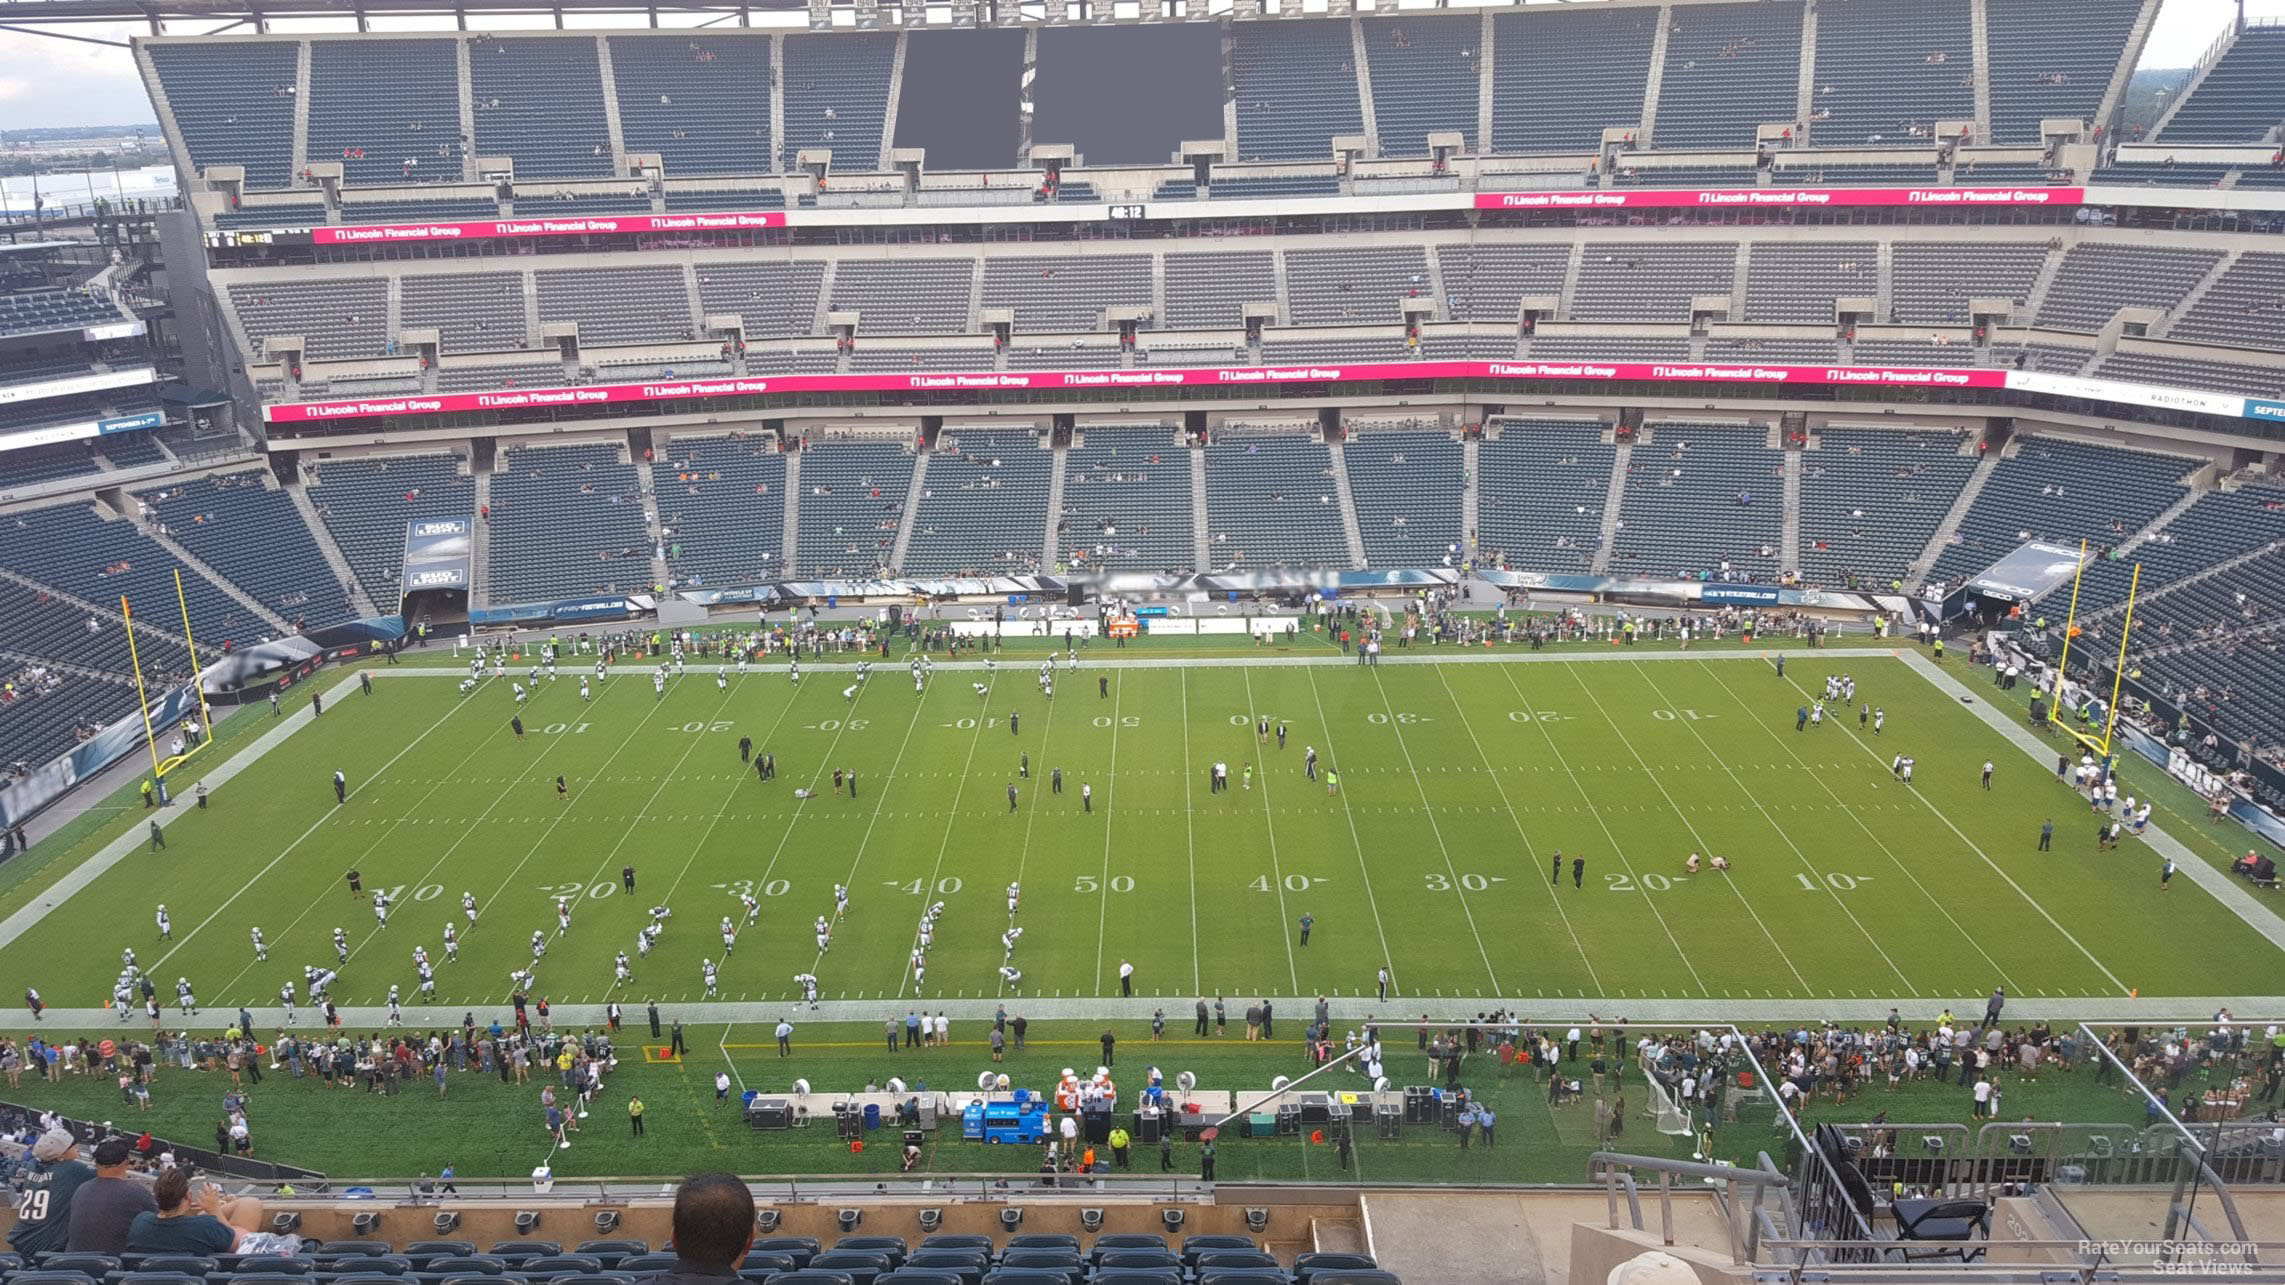 Inside the Lincoln Financial Field - Lincoln Financial Field